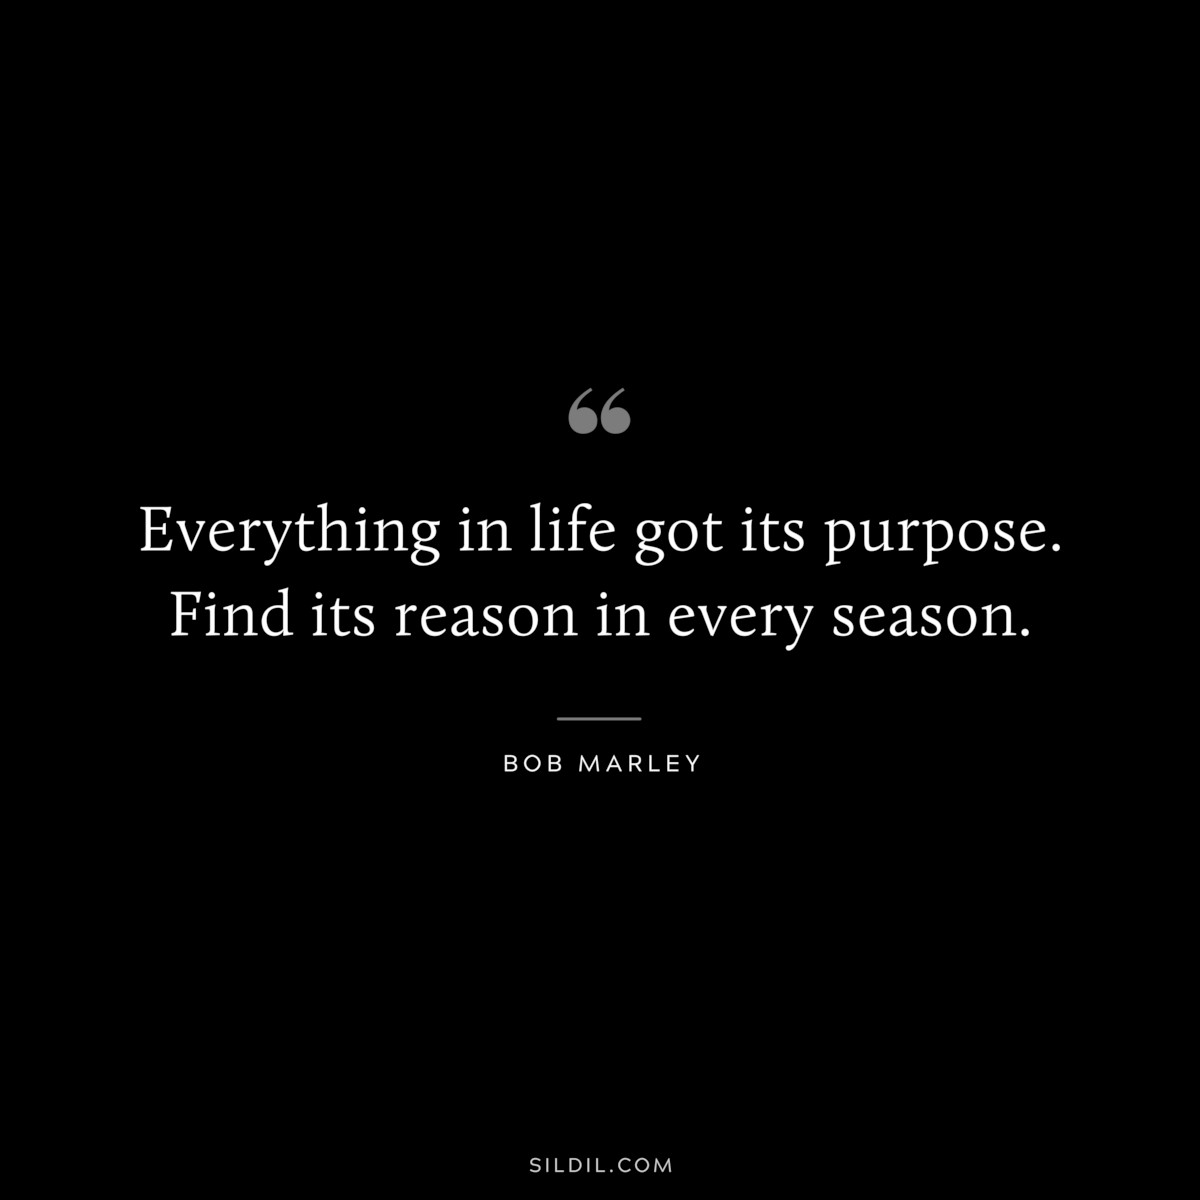 Everything in life got its purpose. Find its reason in every season. ― Bob Marley